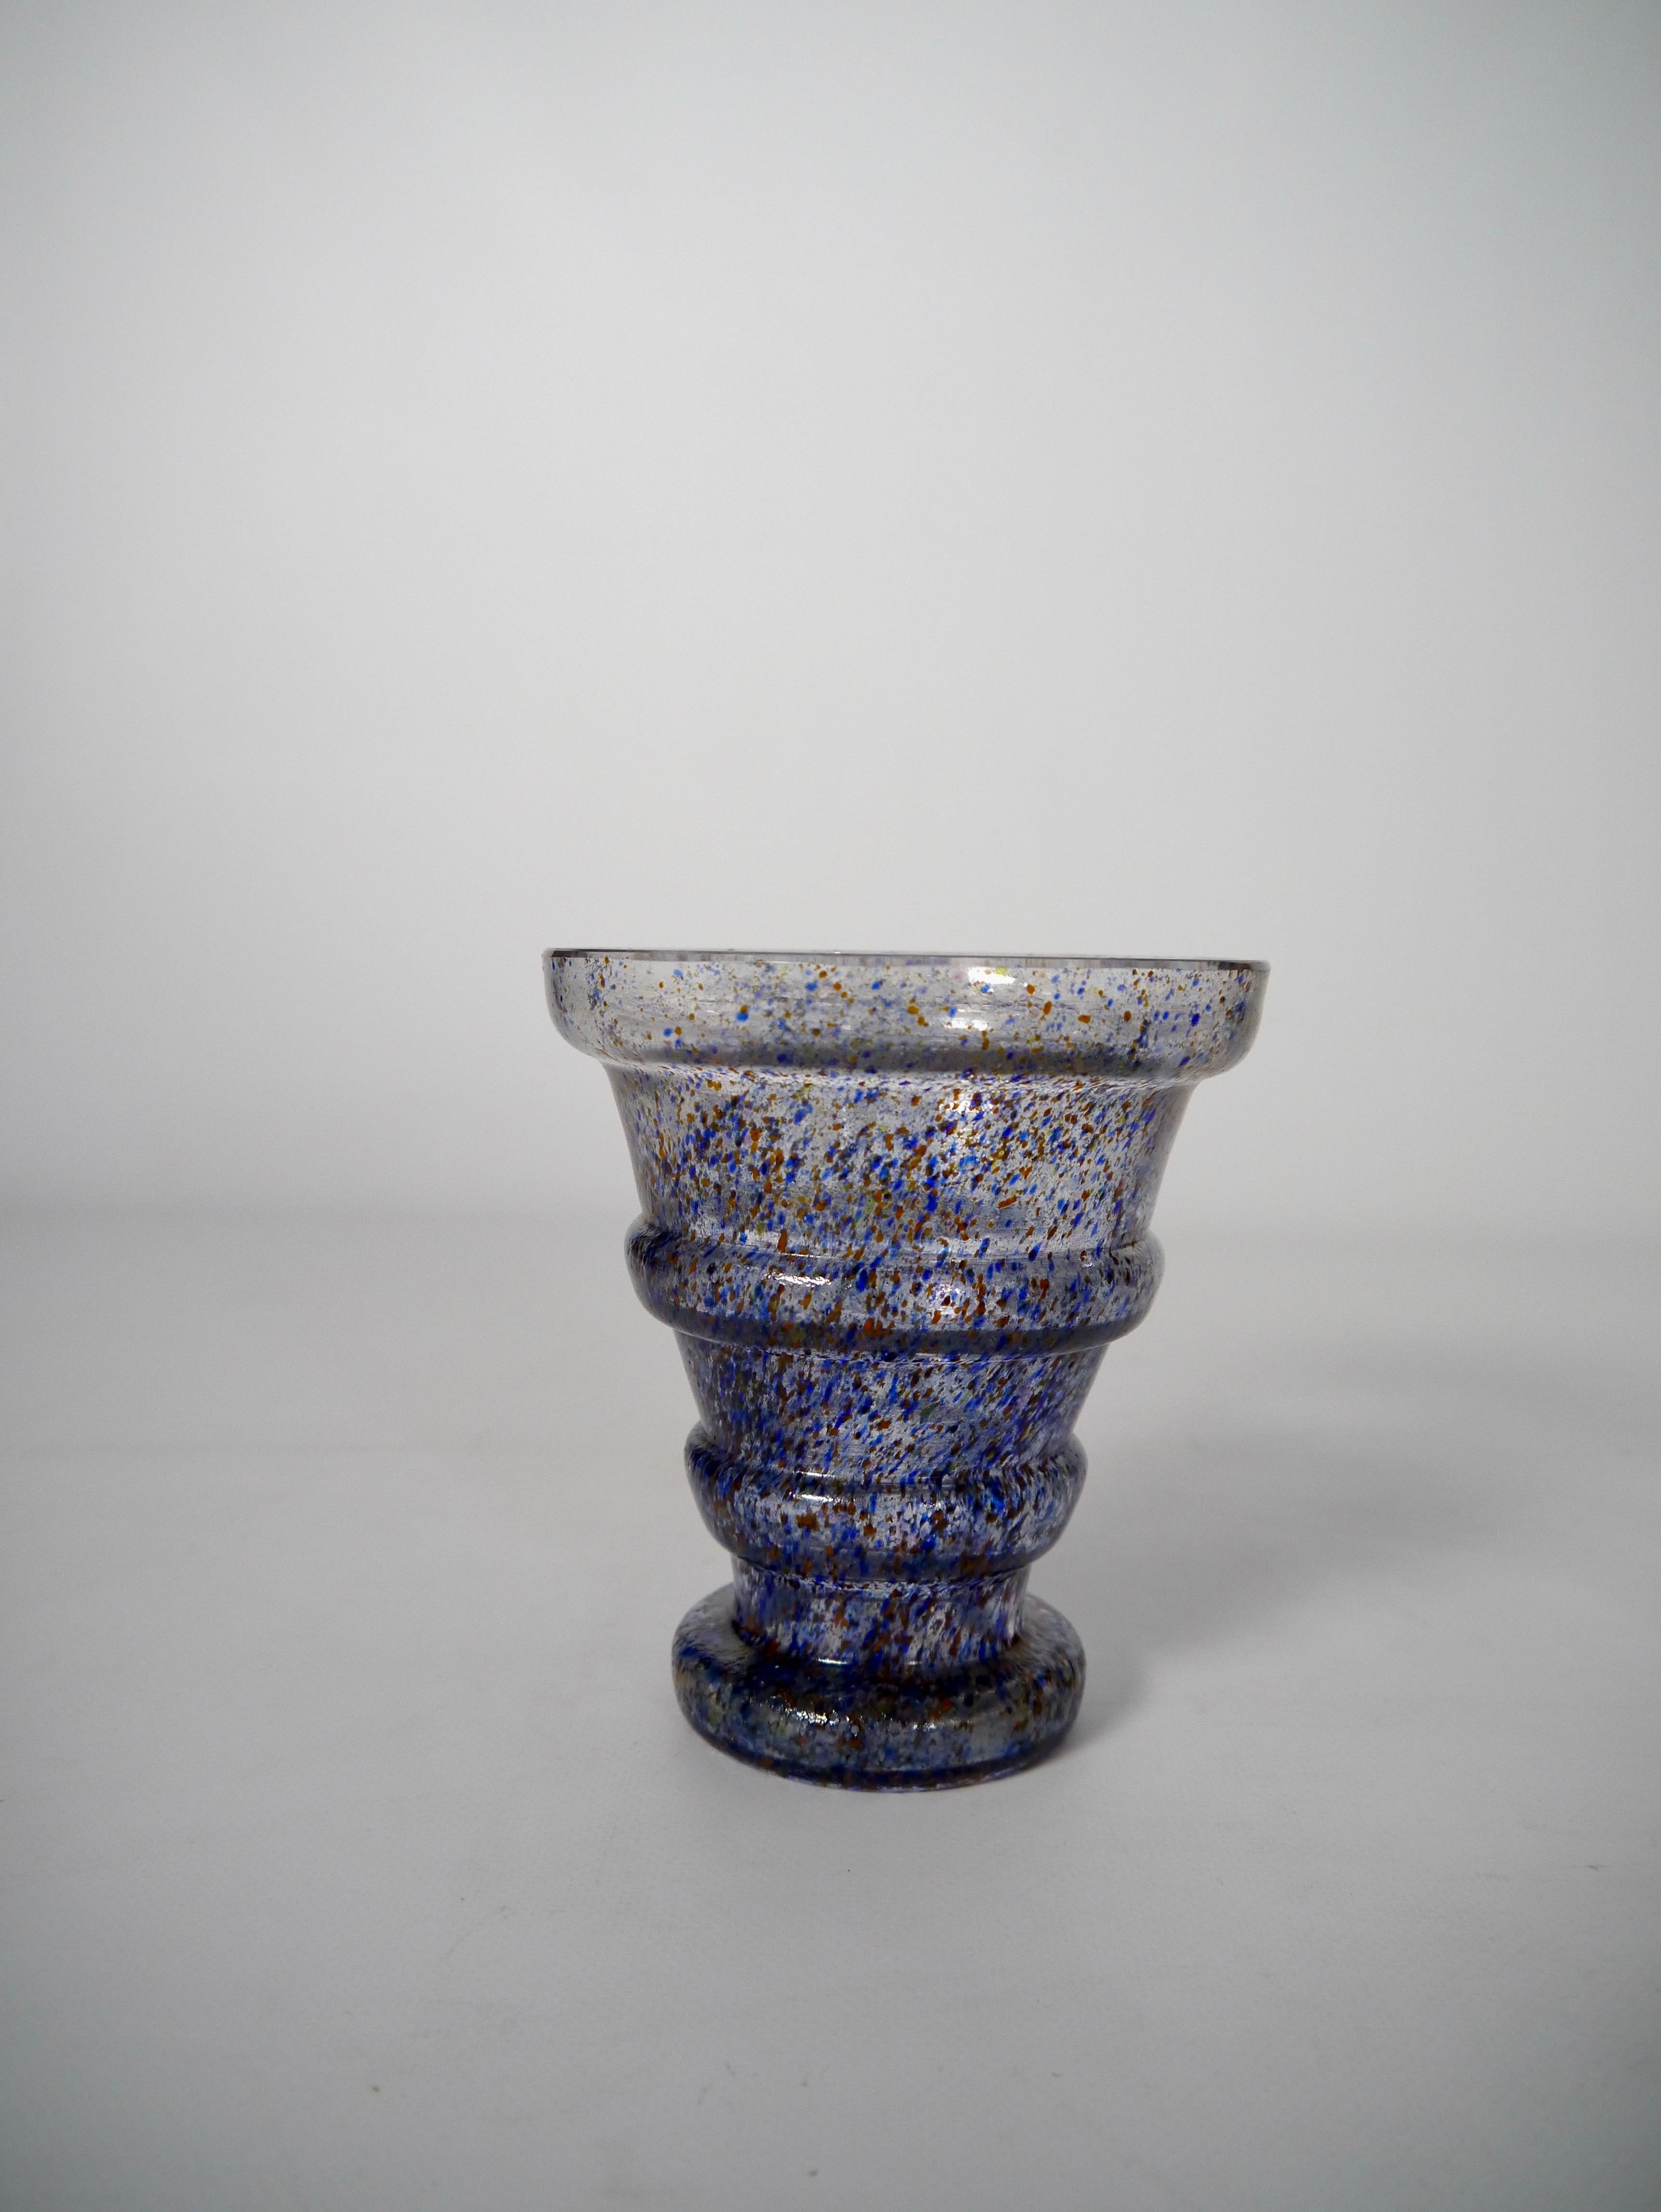 Early Modernist Glass Vase by Sven X:et Erixson for Kosta, Sweden, 1930s For Sale 2